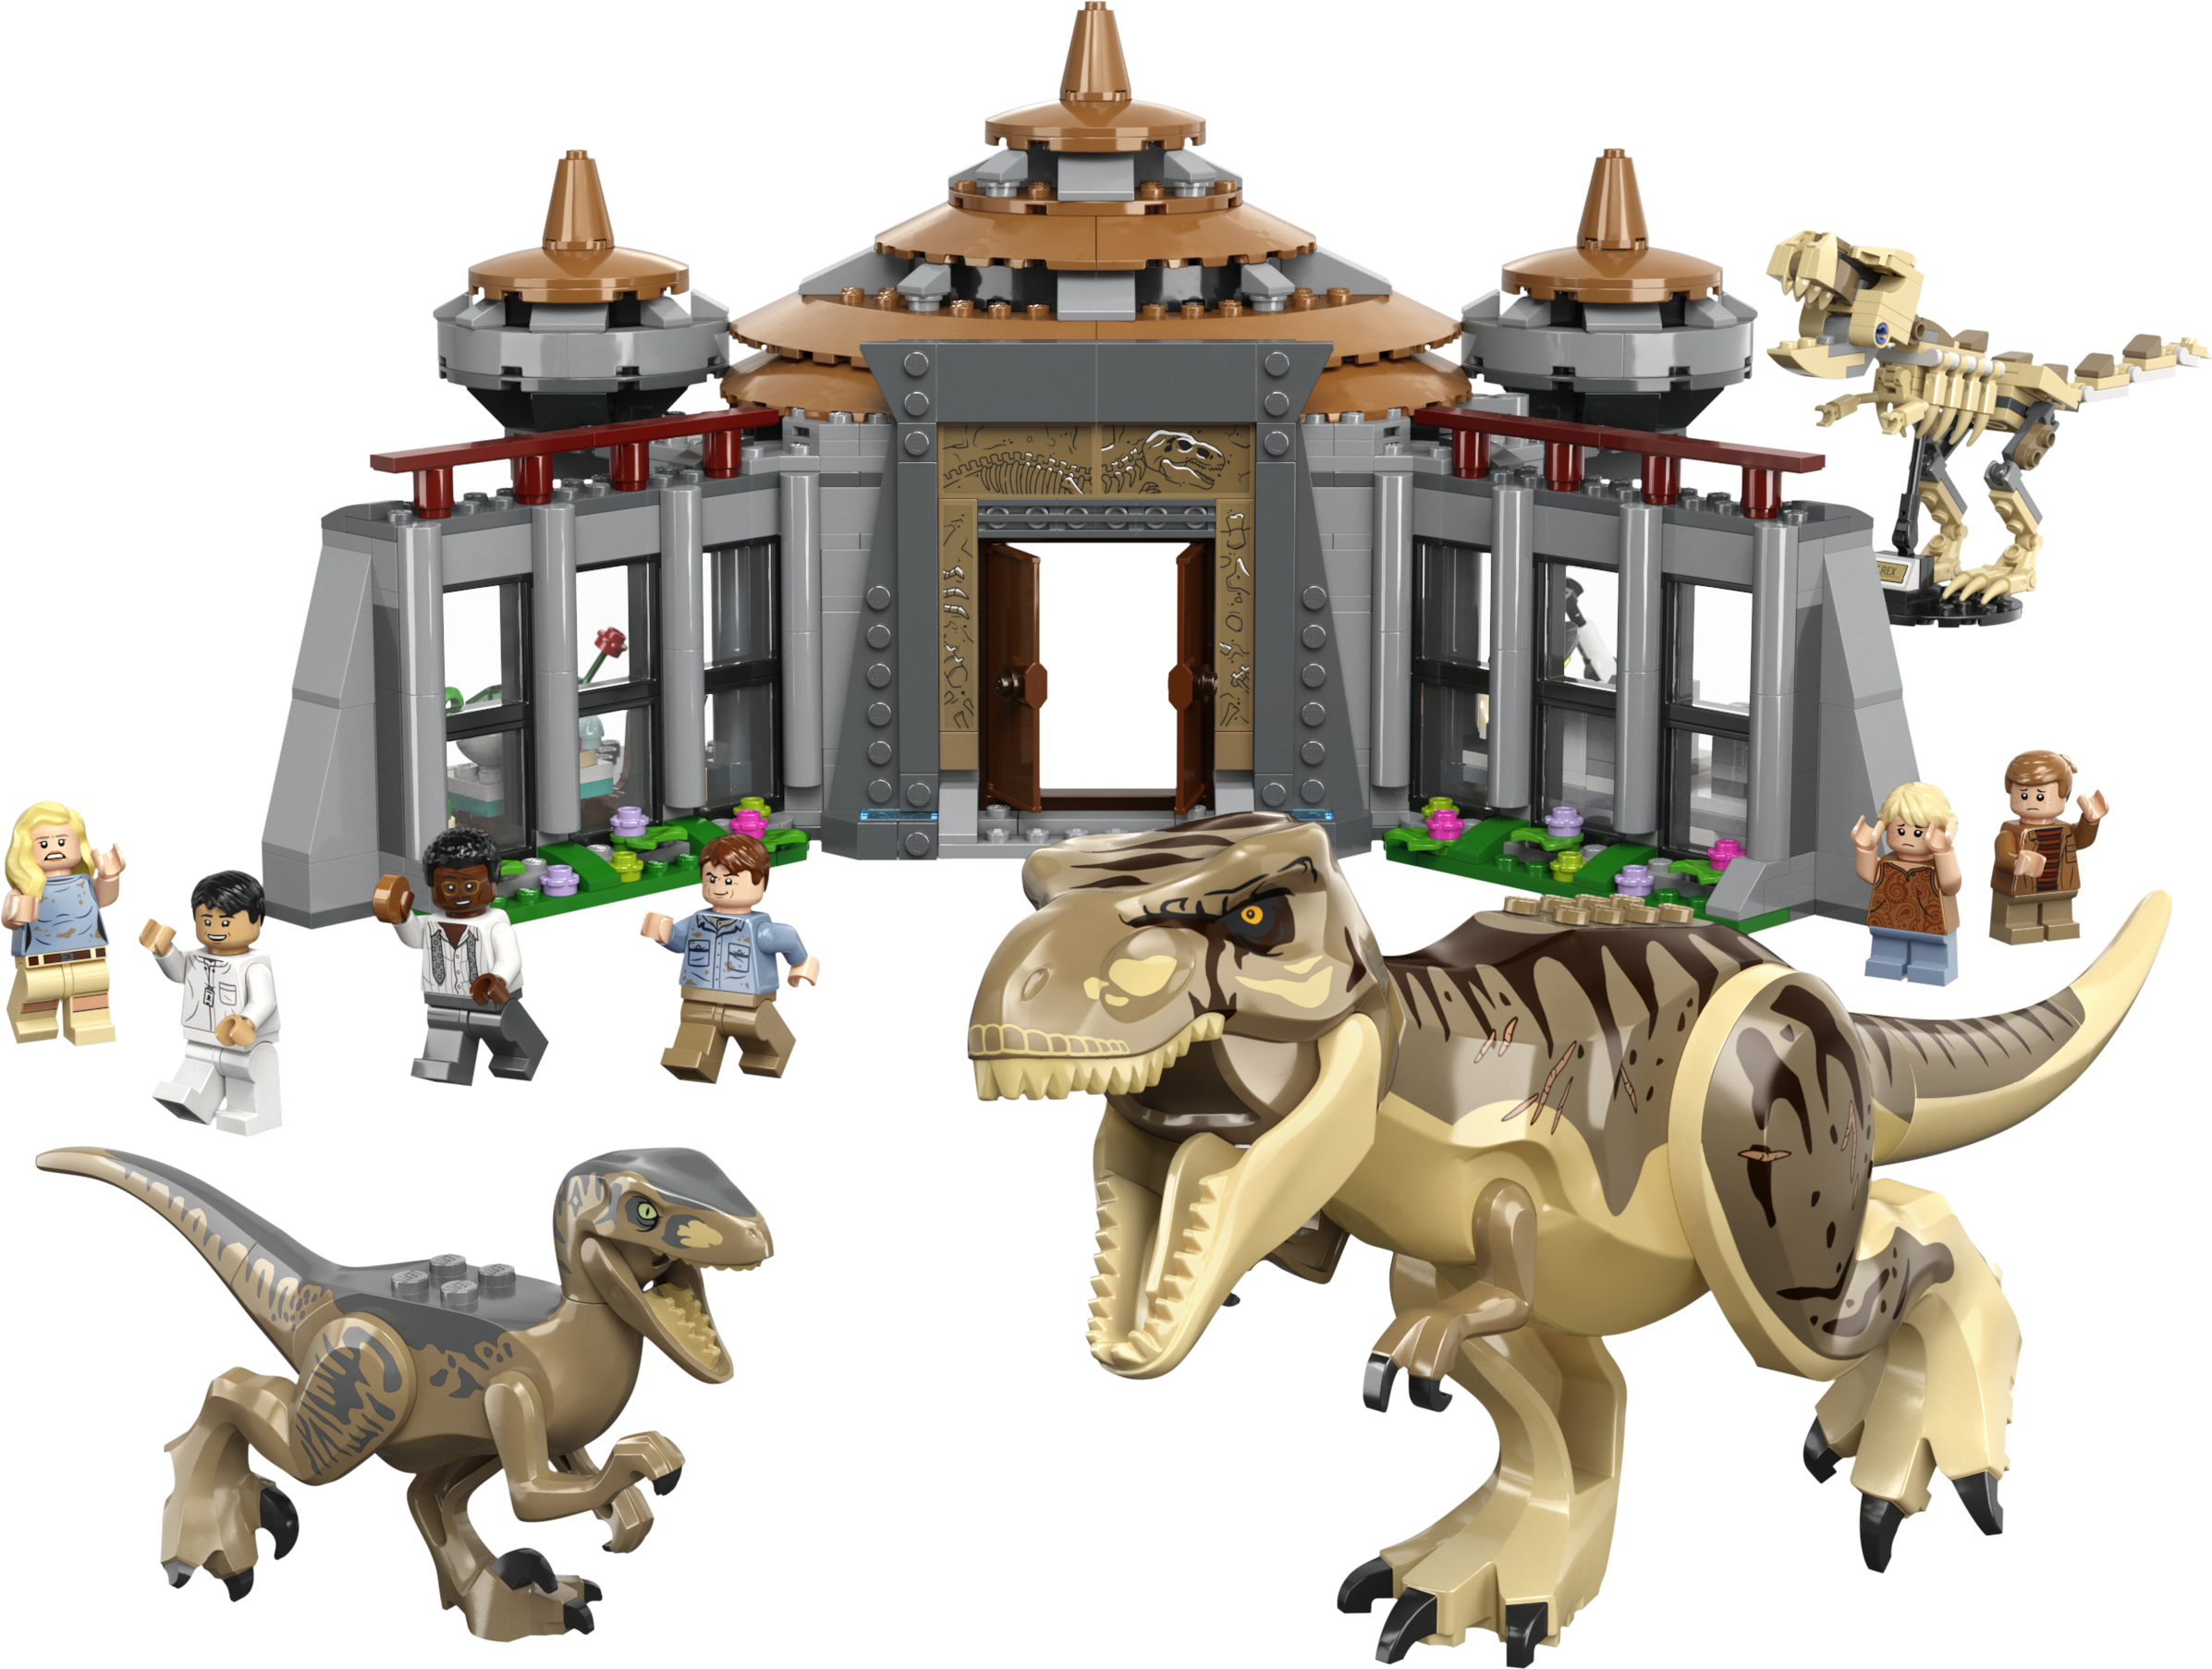 Lego Jurassic Park 30th Anniversary Compilation Speed Build of All